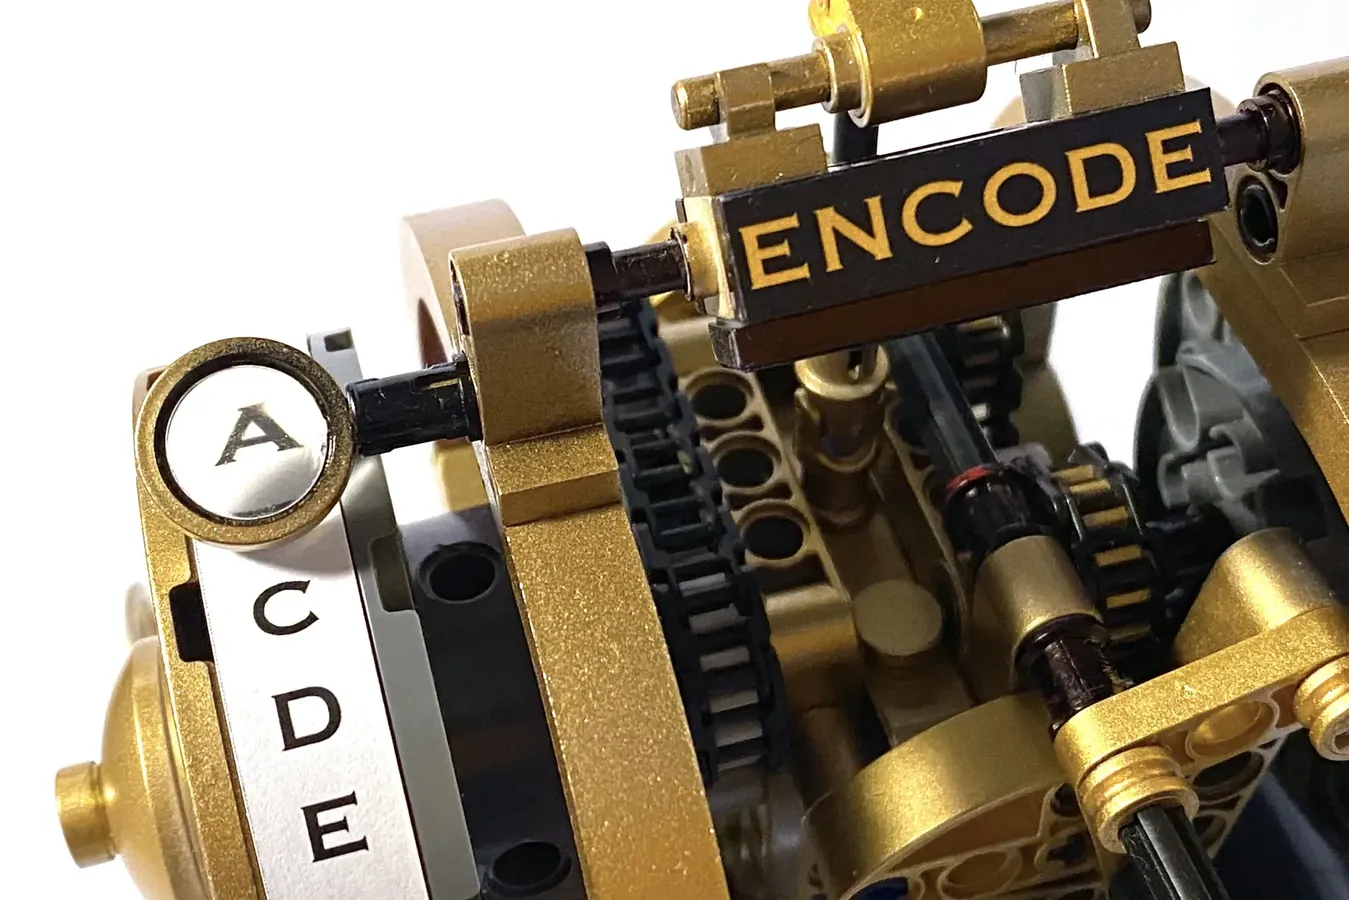 Lego (R) ideas that can actually be used Cipher machine